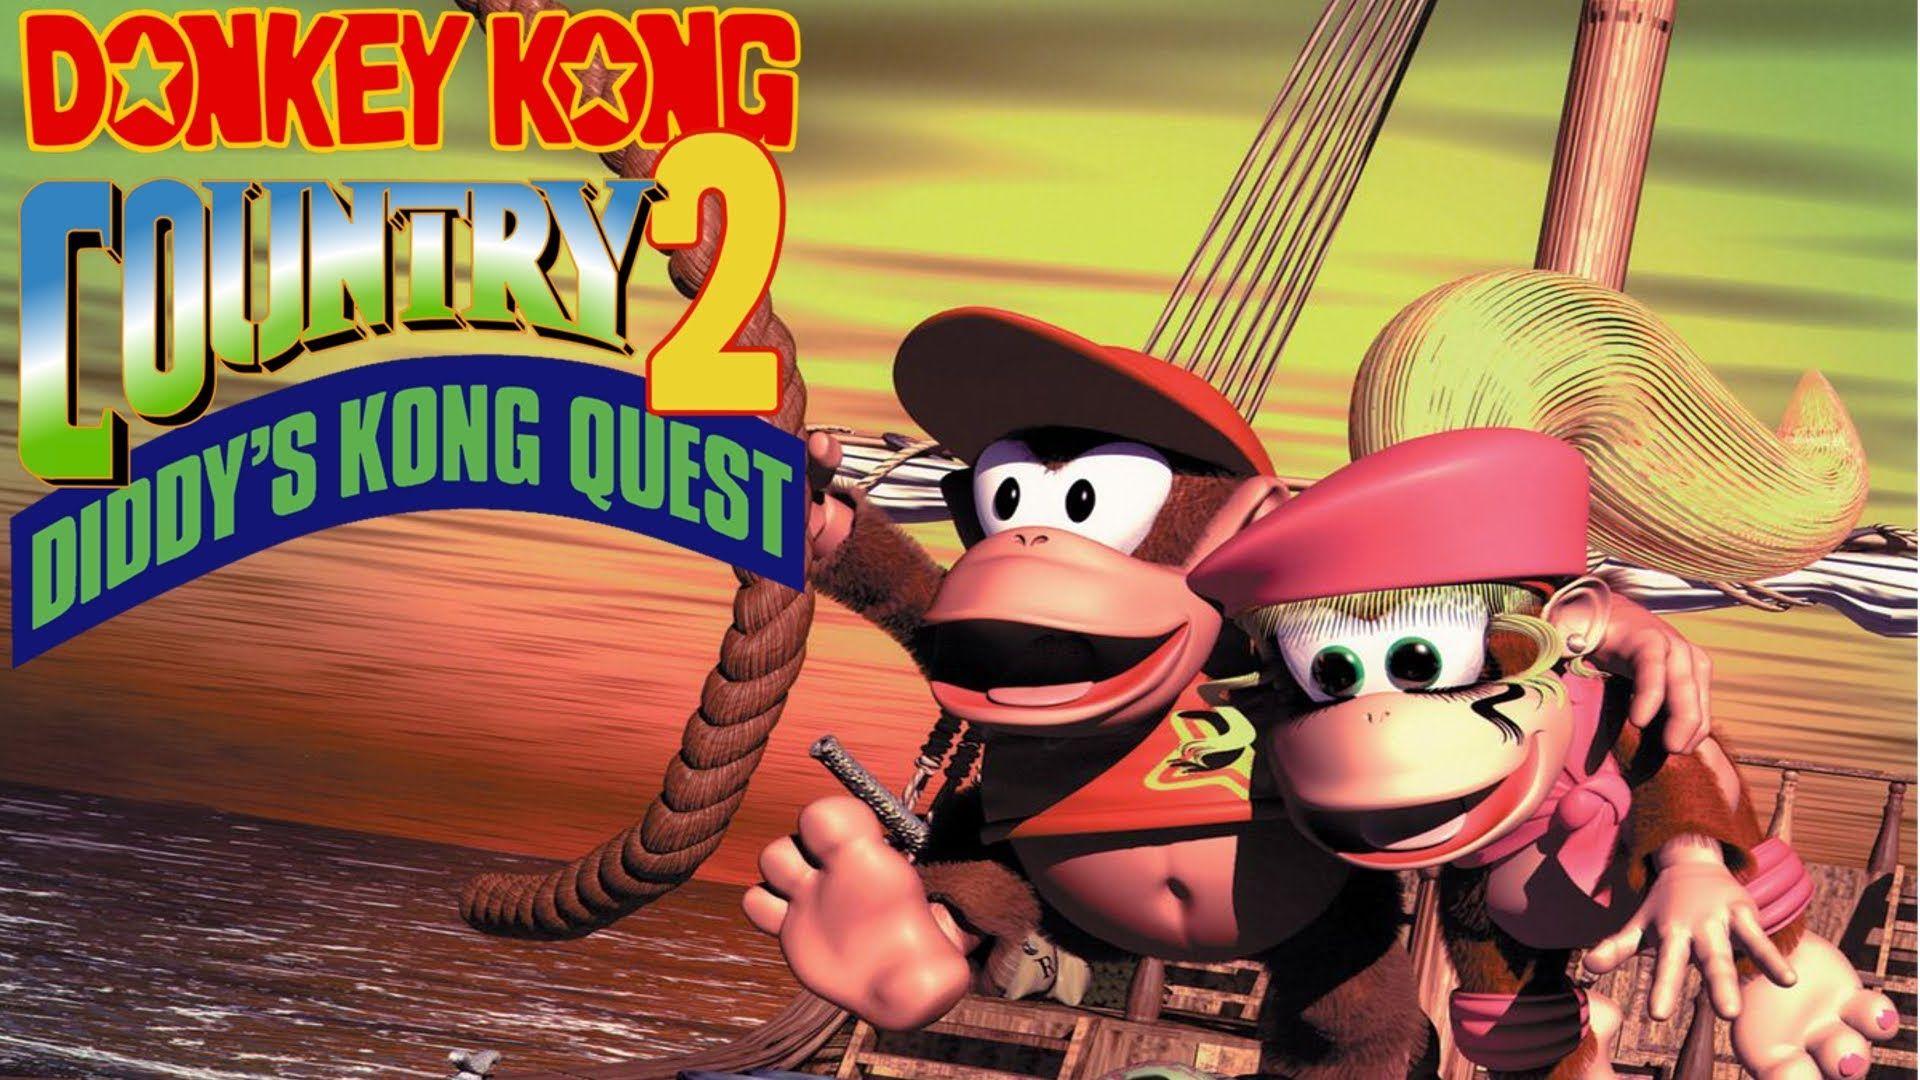 Take A Look: Donkey Kong Country 2: Diddy's Kong Quest